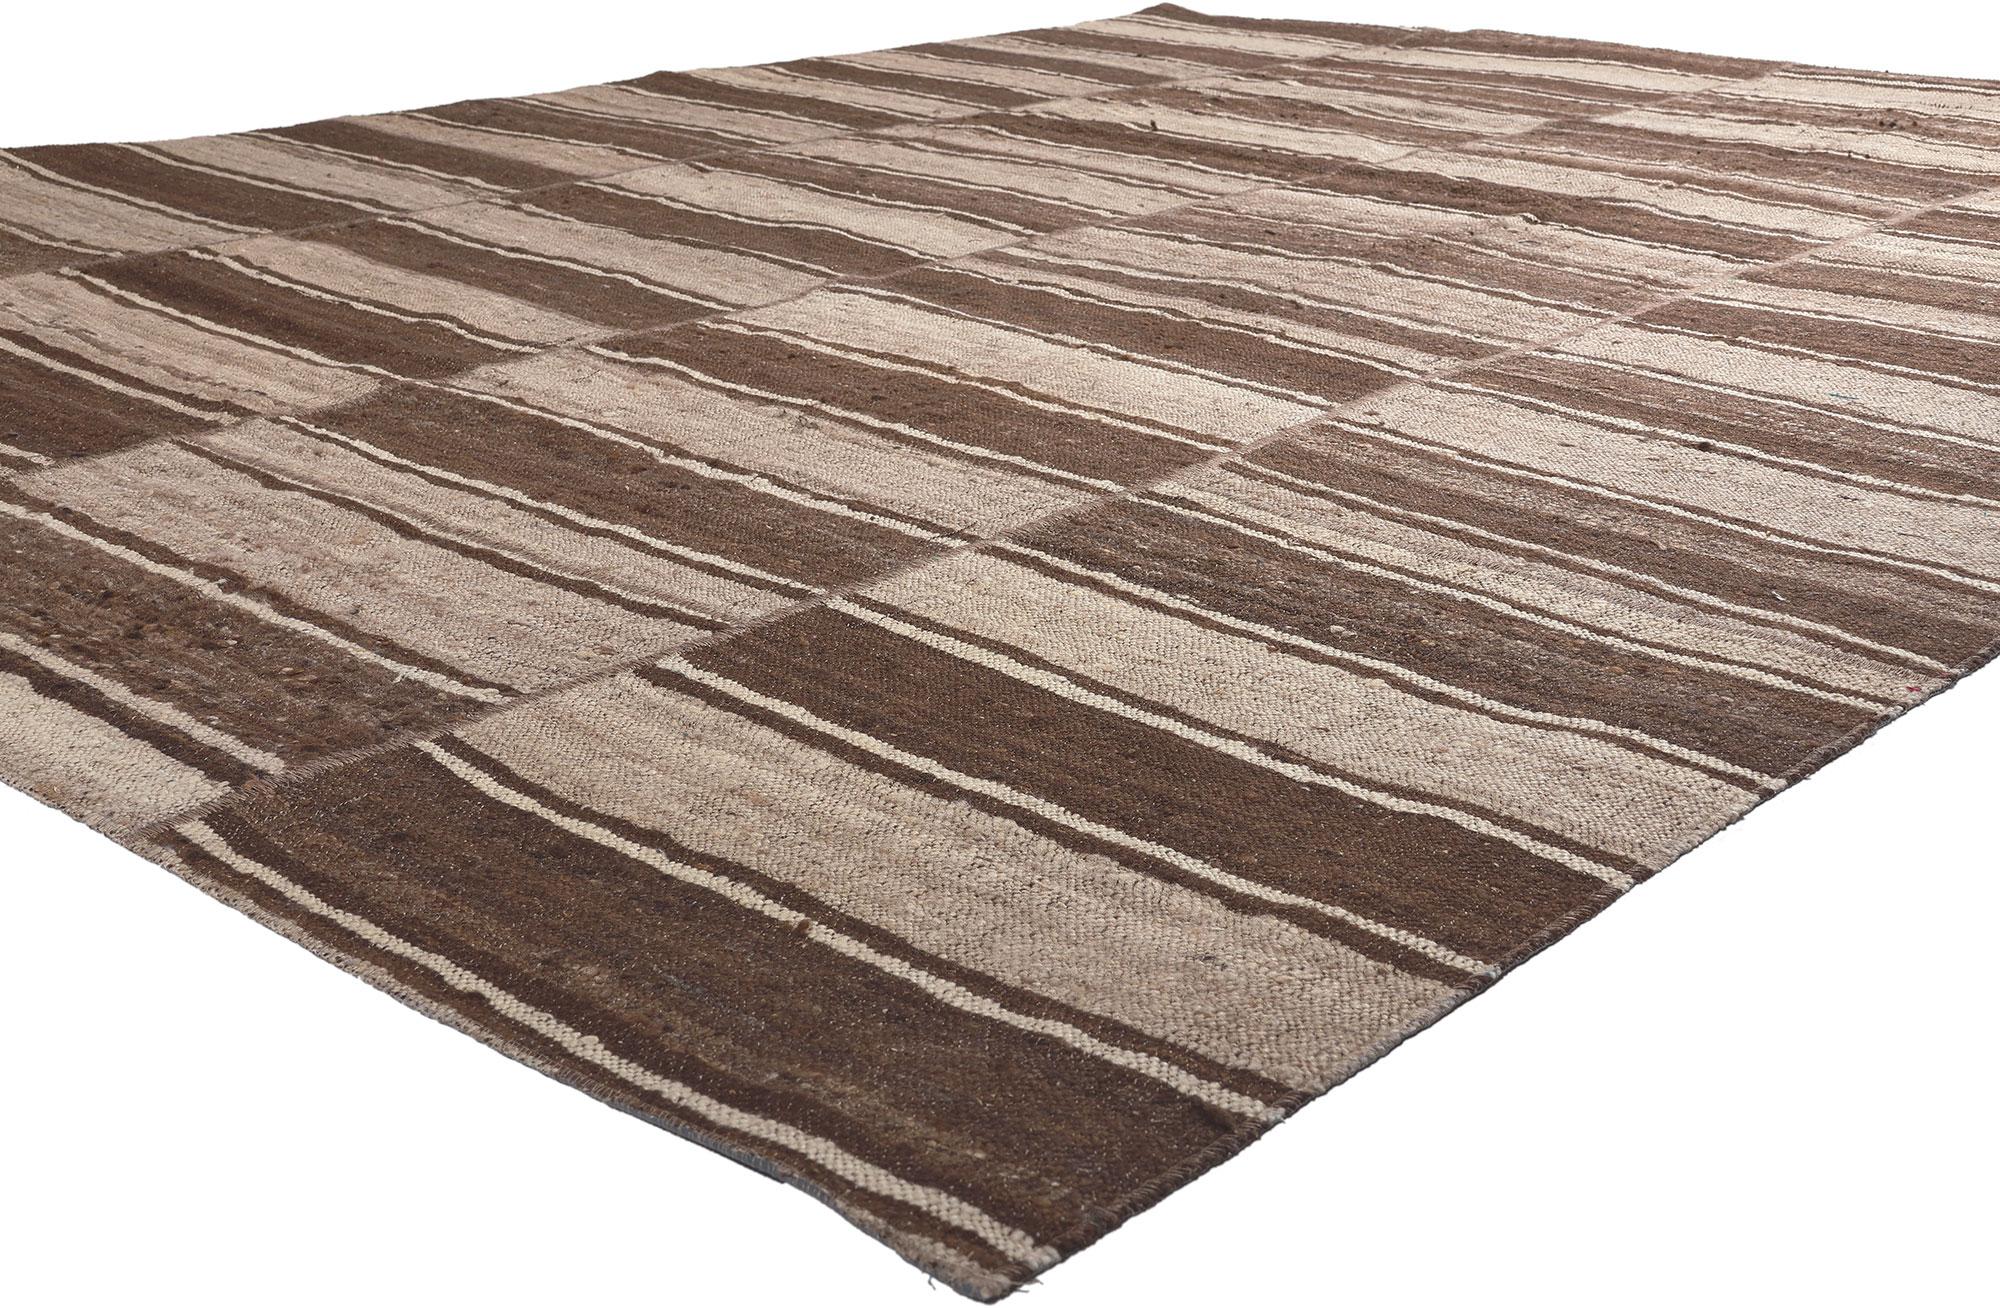 60638 Brown Vintage Striped Turkish Kilim Rug, 08'09 x 11'02. This handwoven wool vintage Turkish kilim rug embodies the essence of Wabi-Sabi as it seamlessly integrates with a commitment to sustainable design, resulting in a masterpiece that